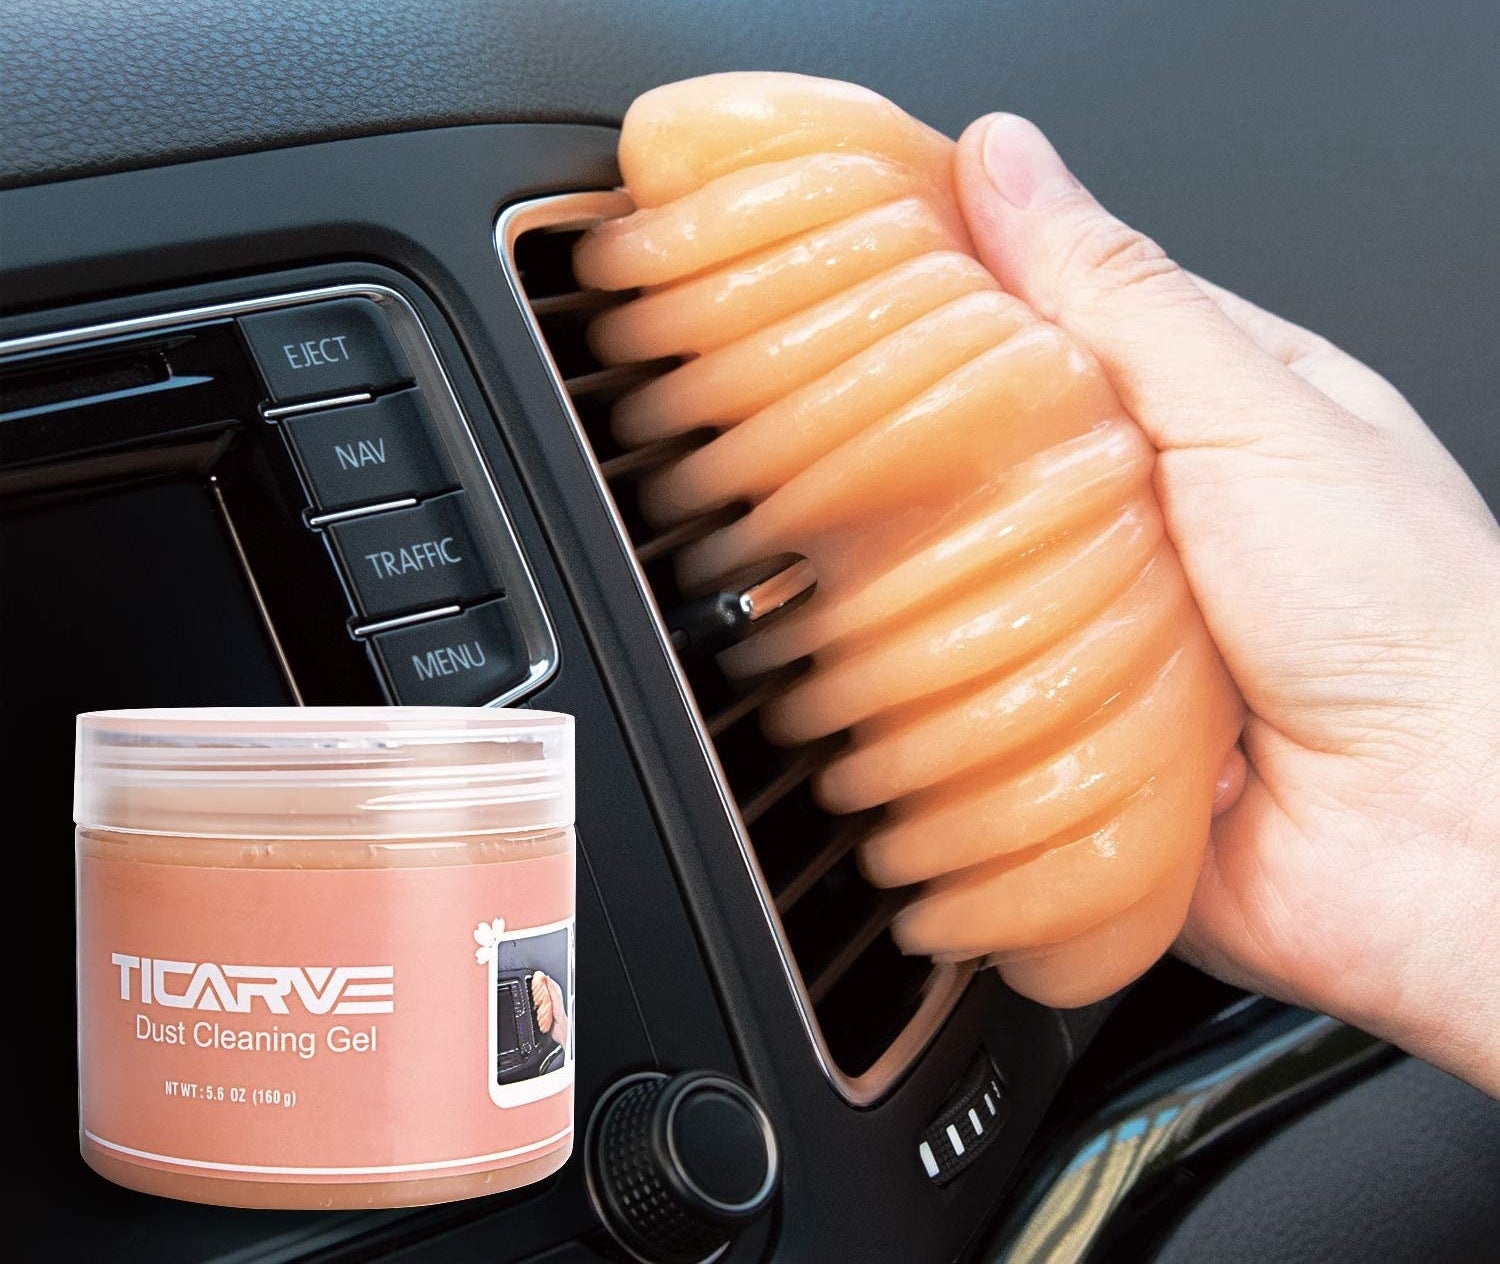 The TICARVE Dust Cleaning Gel removing dust from a car&#x27;s air vent